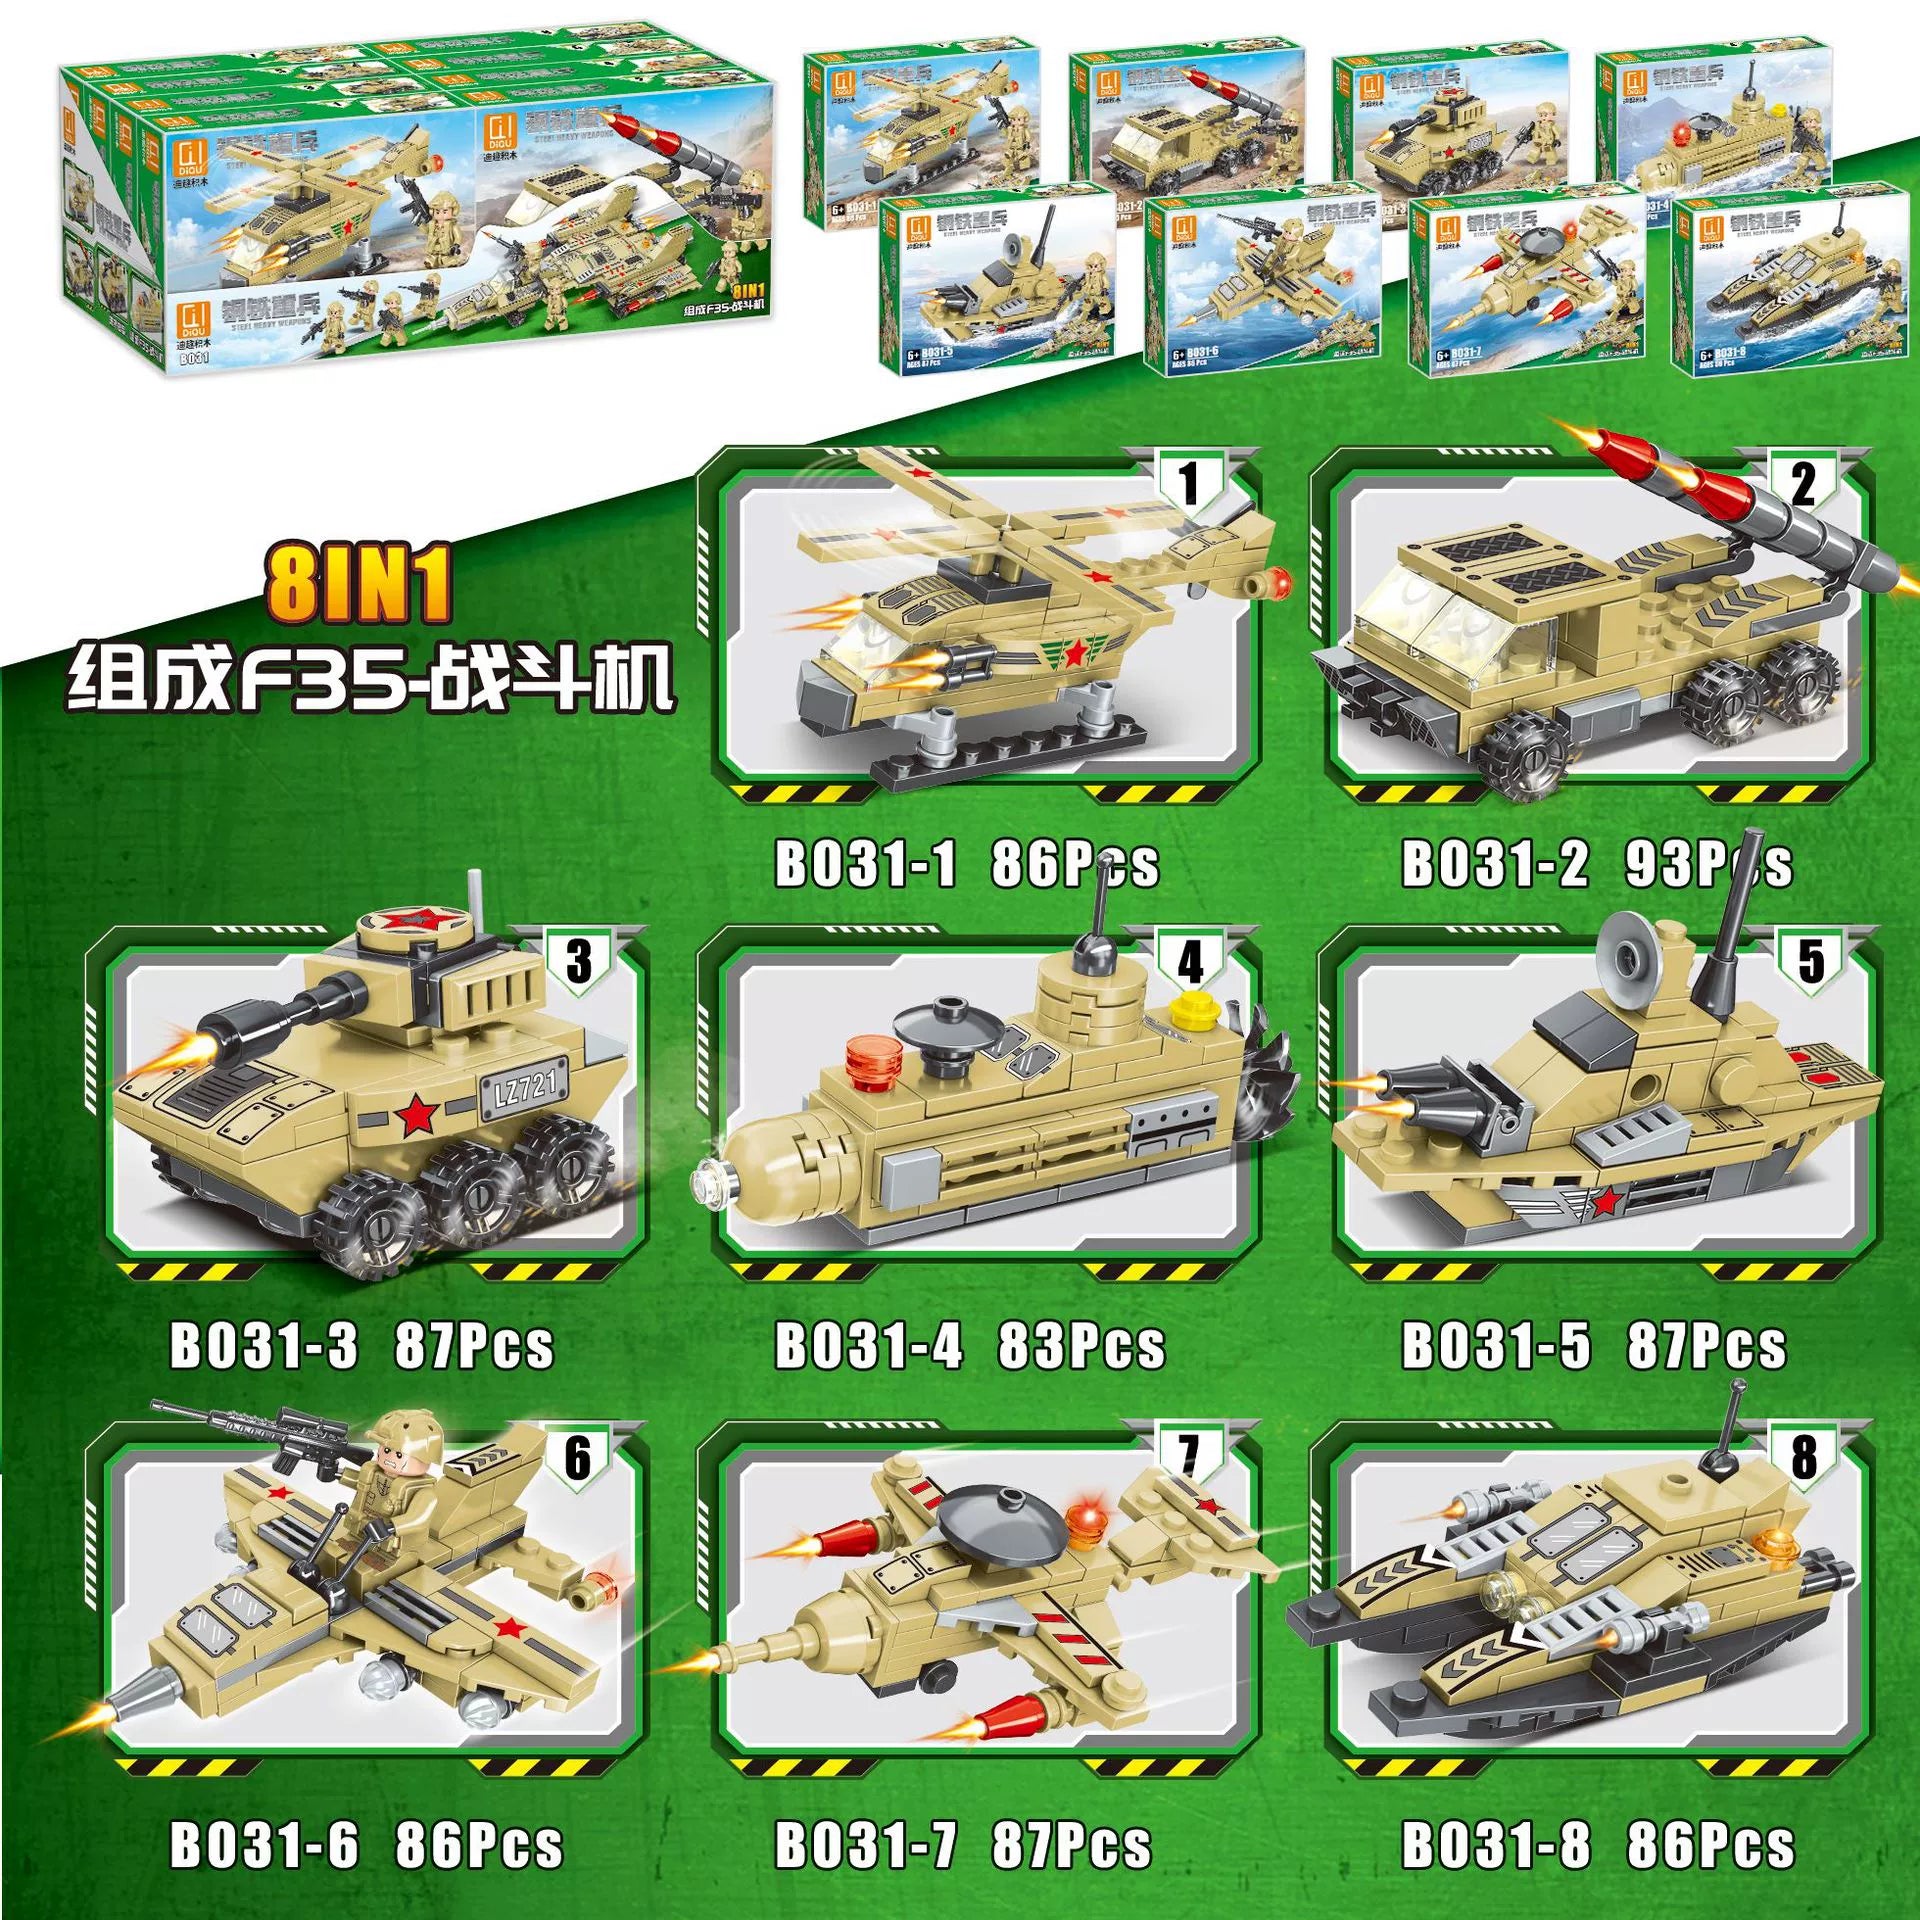 Diqu Military Brick Series: Diverse Army and Air Force Building Block Playsets